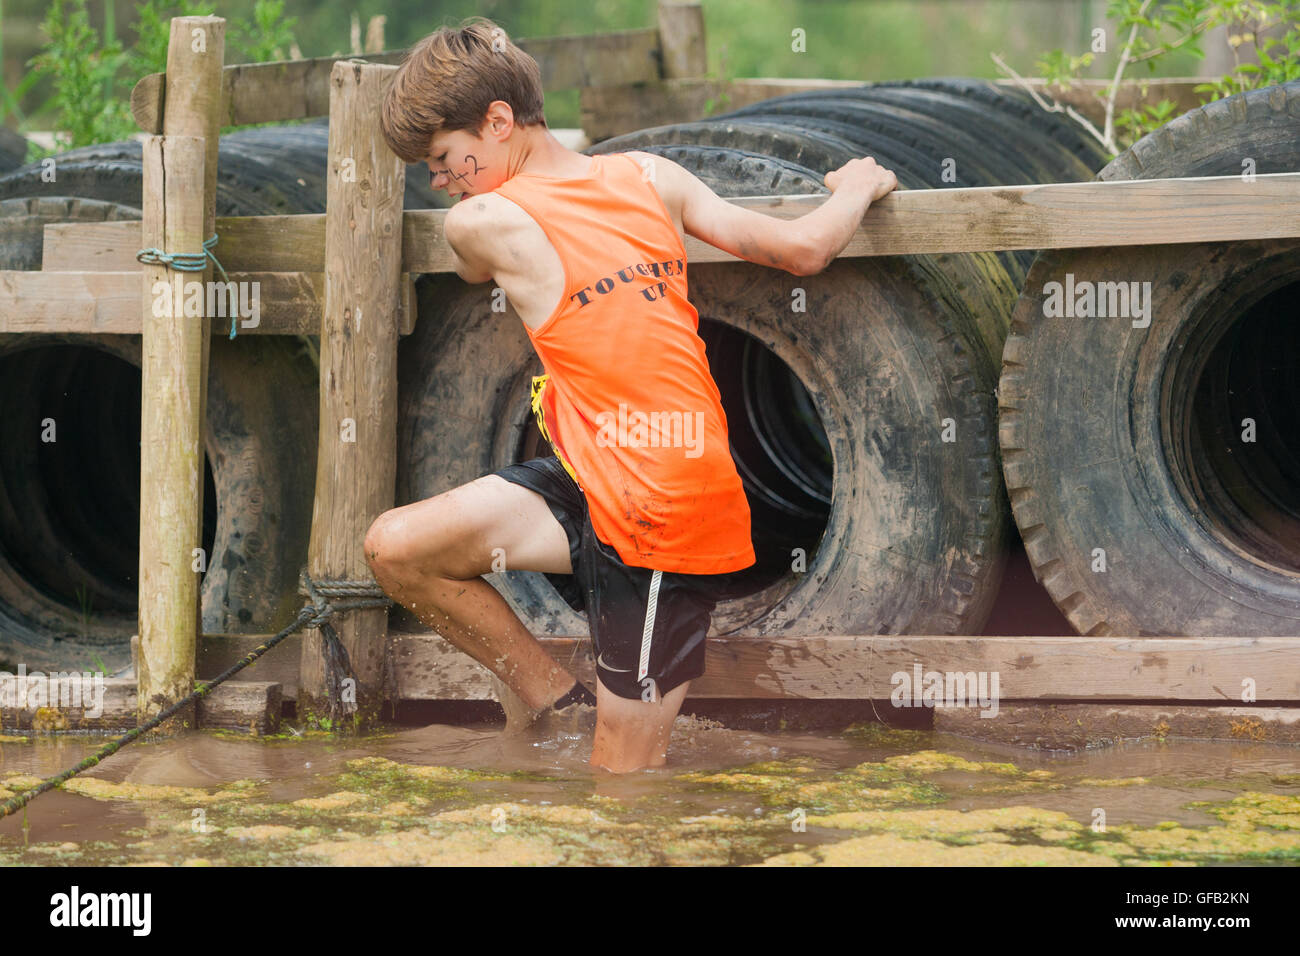 Tough Guy Nettle Warrior 2016 competitor, near Wolverhampton UK at the annual summer obstacle course Stock Photo